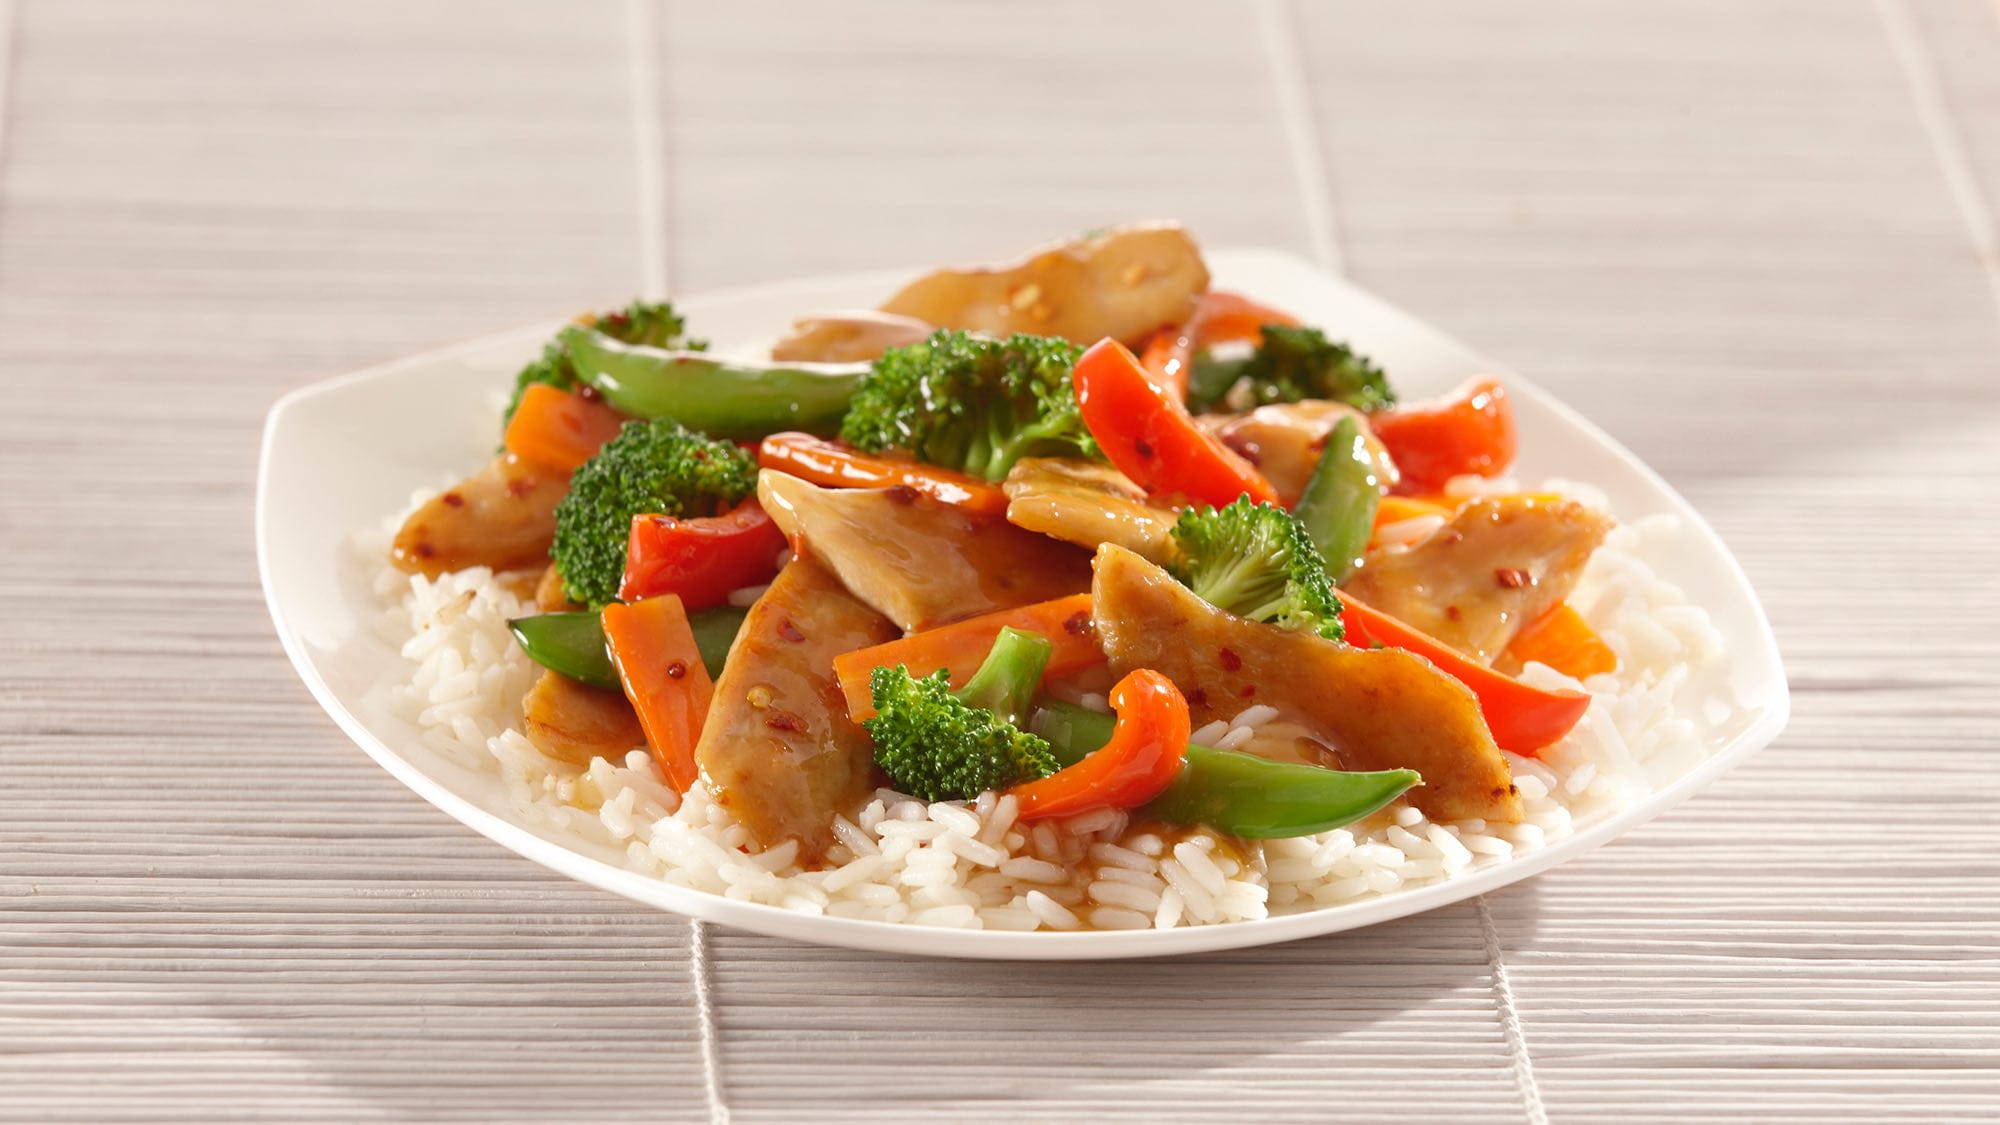 CHICKEN AND VEGETABLE STIR-FRY